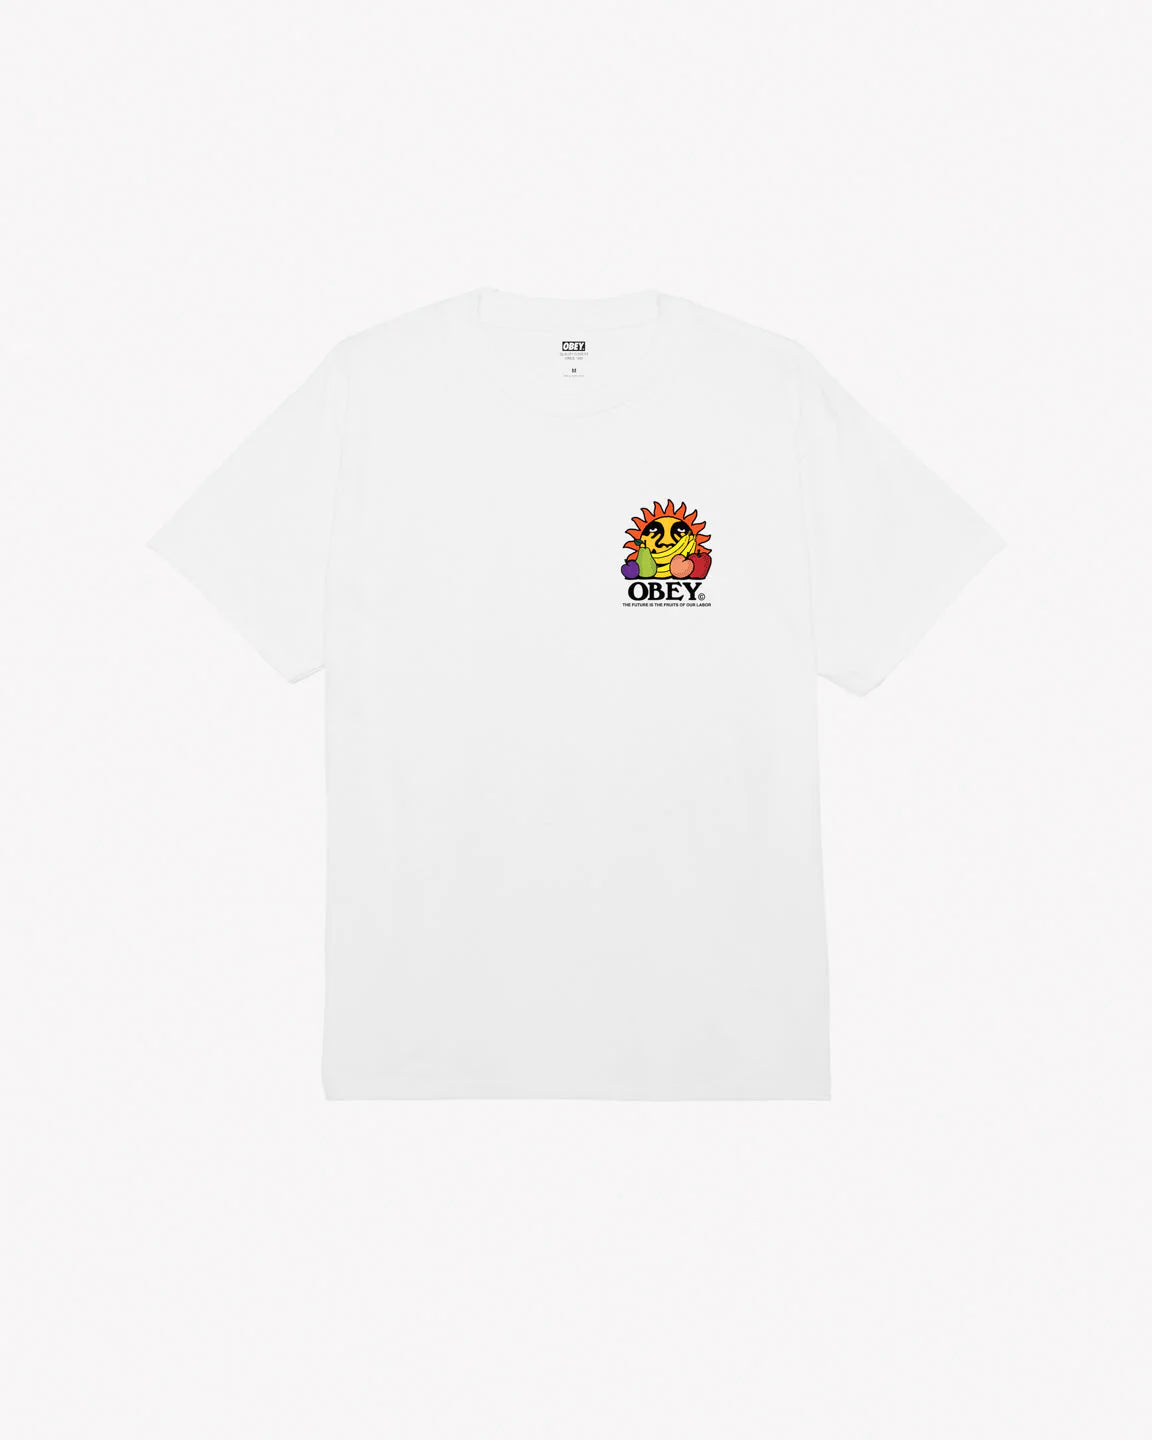 OBEY THE FUTURE IS THE FRUITS OF OUR LABOR CLASSIC T-SHIRT - White